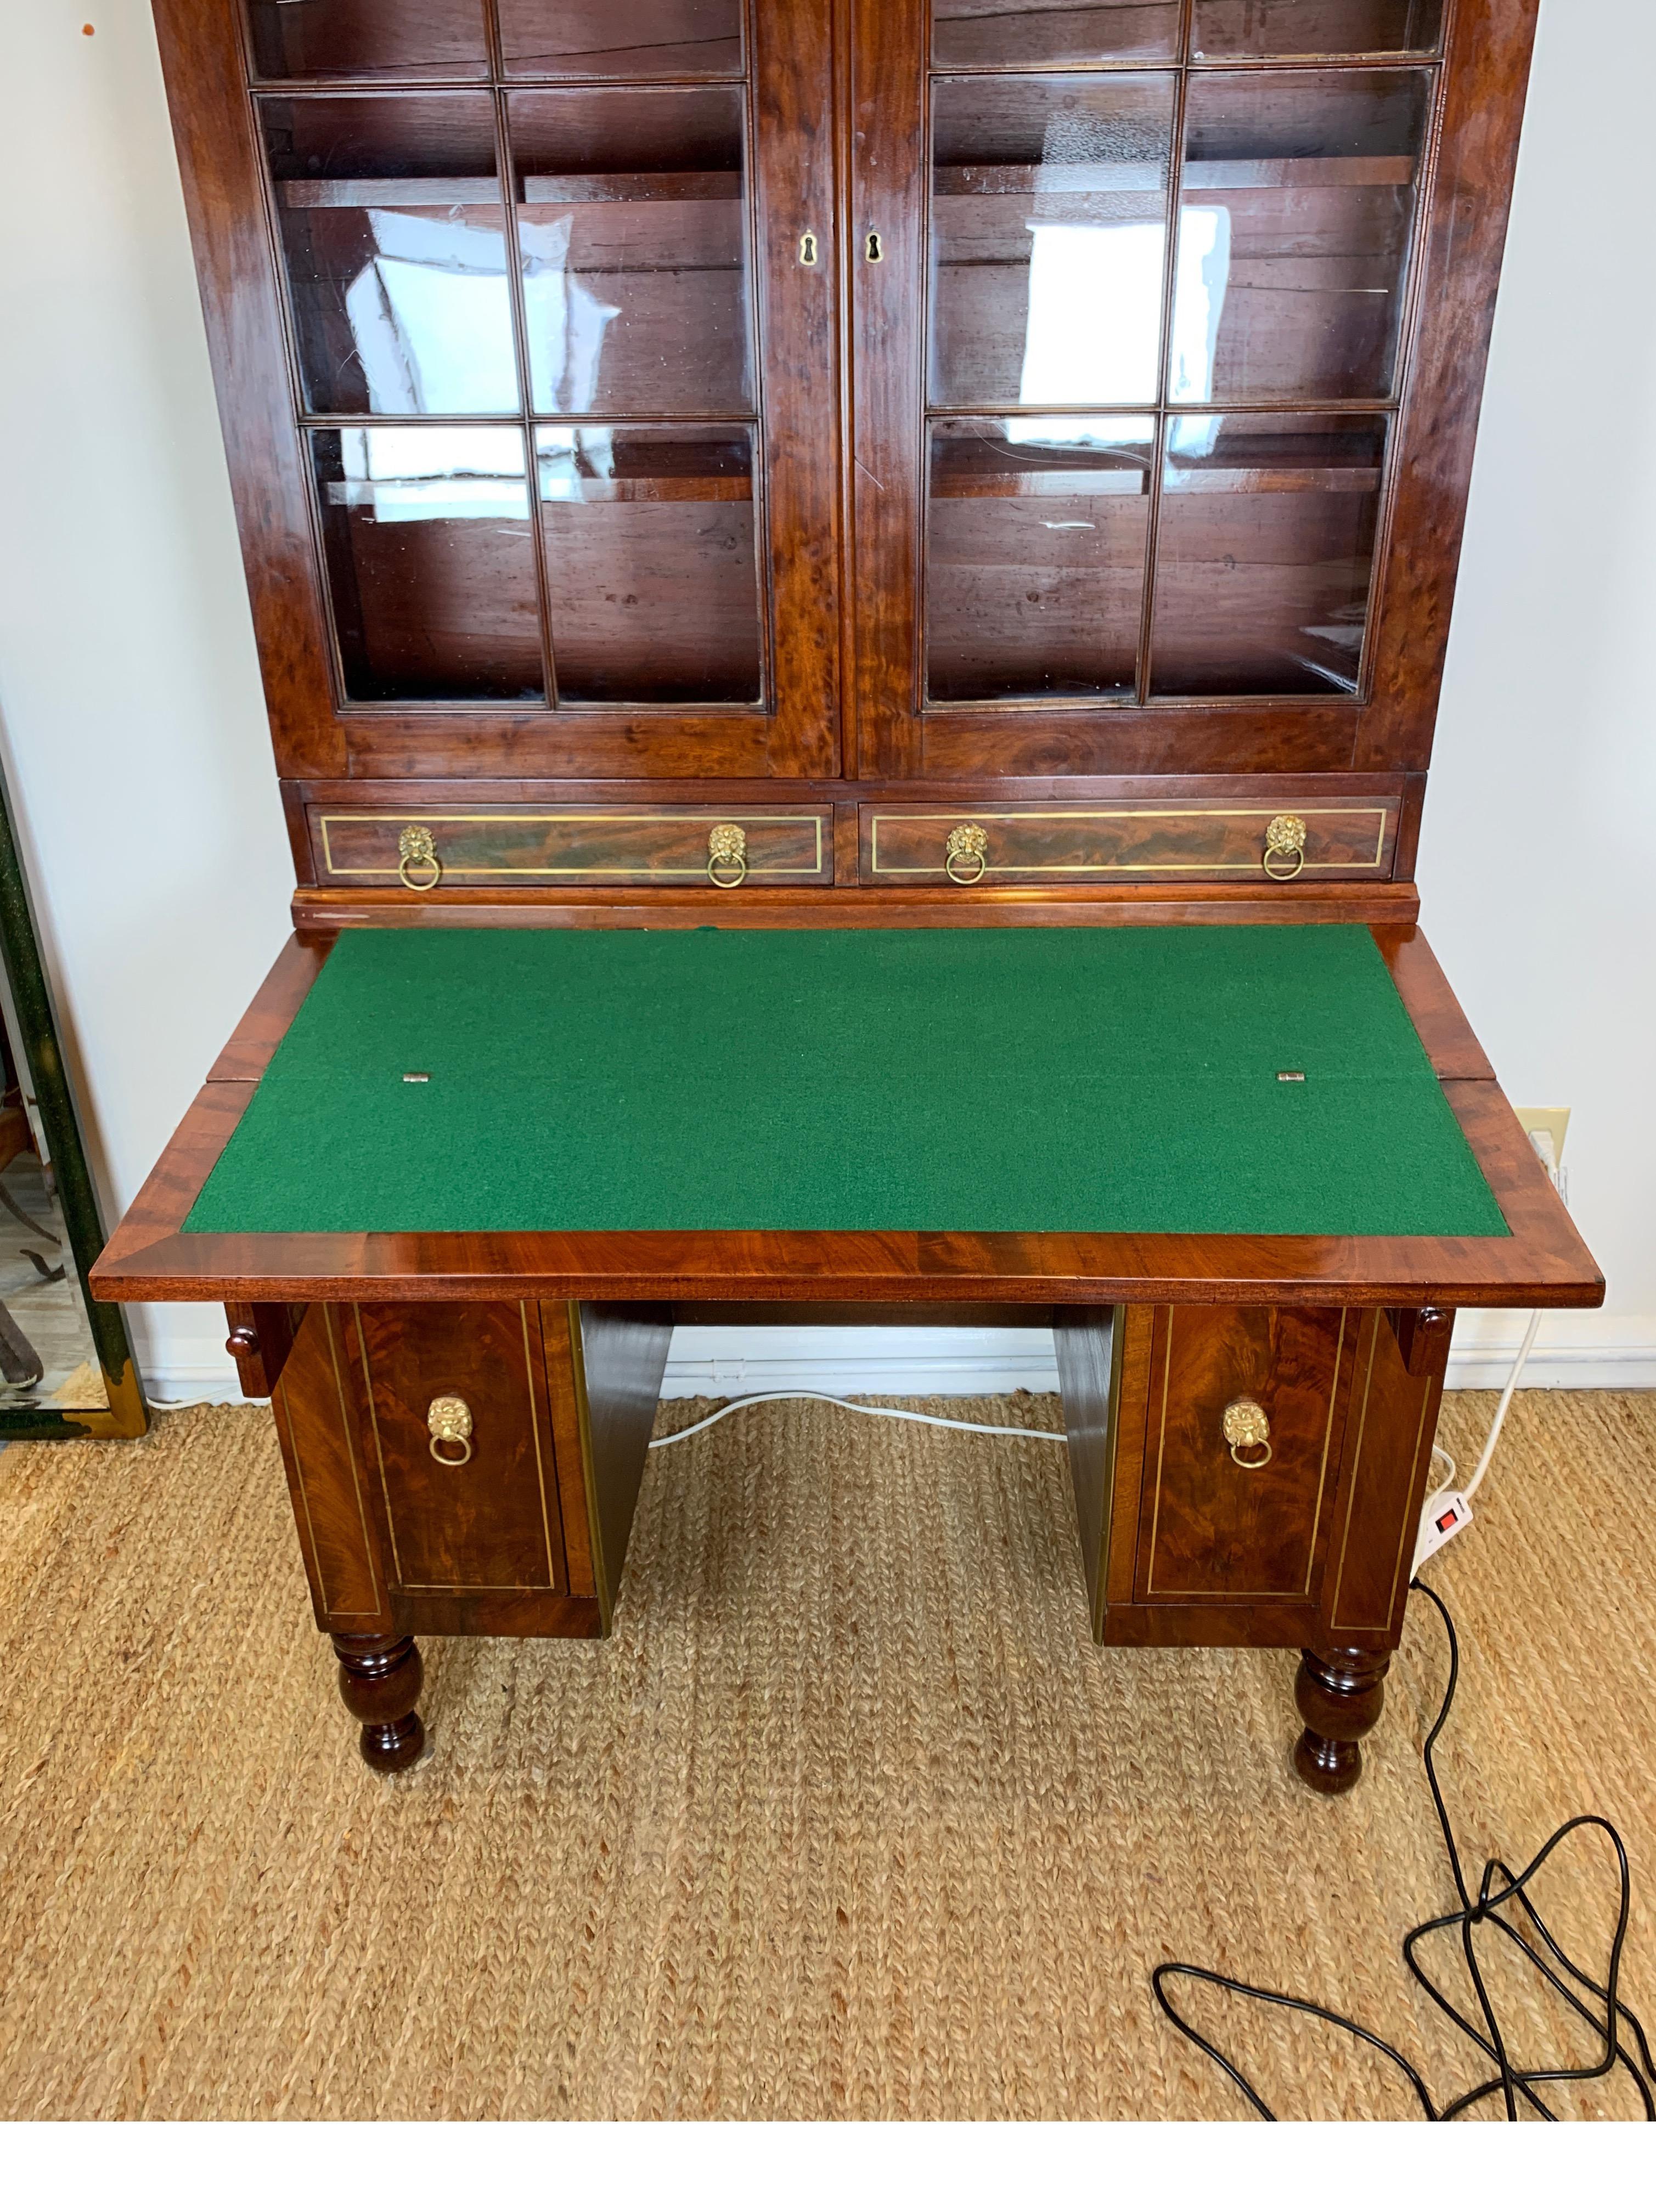 Glass Late Federal Desk and Bookcase in Walnut with Brass Inlay, 1820-1830